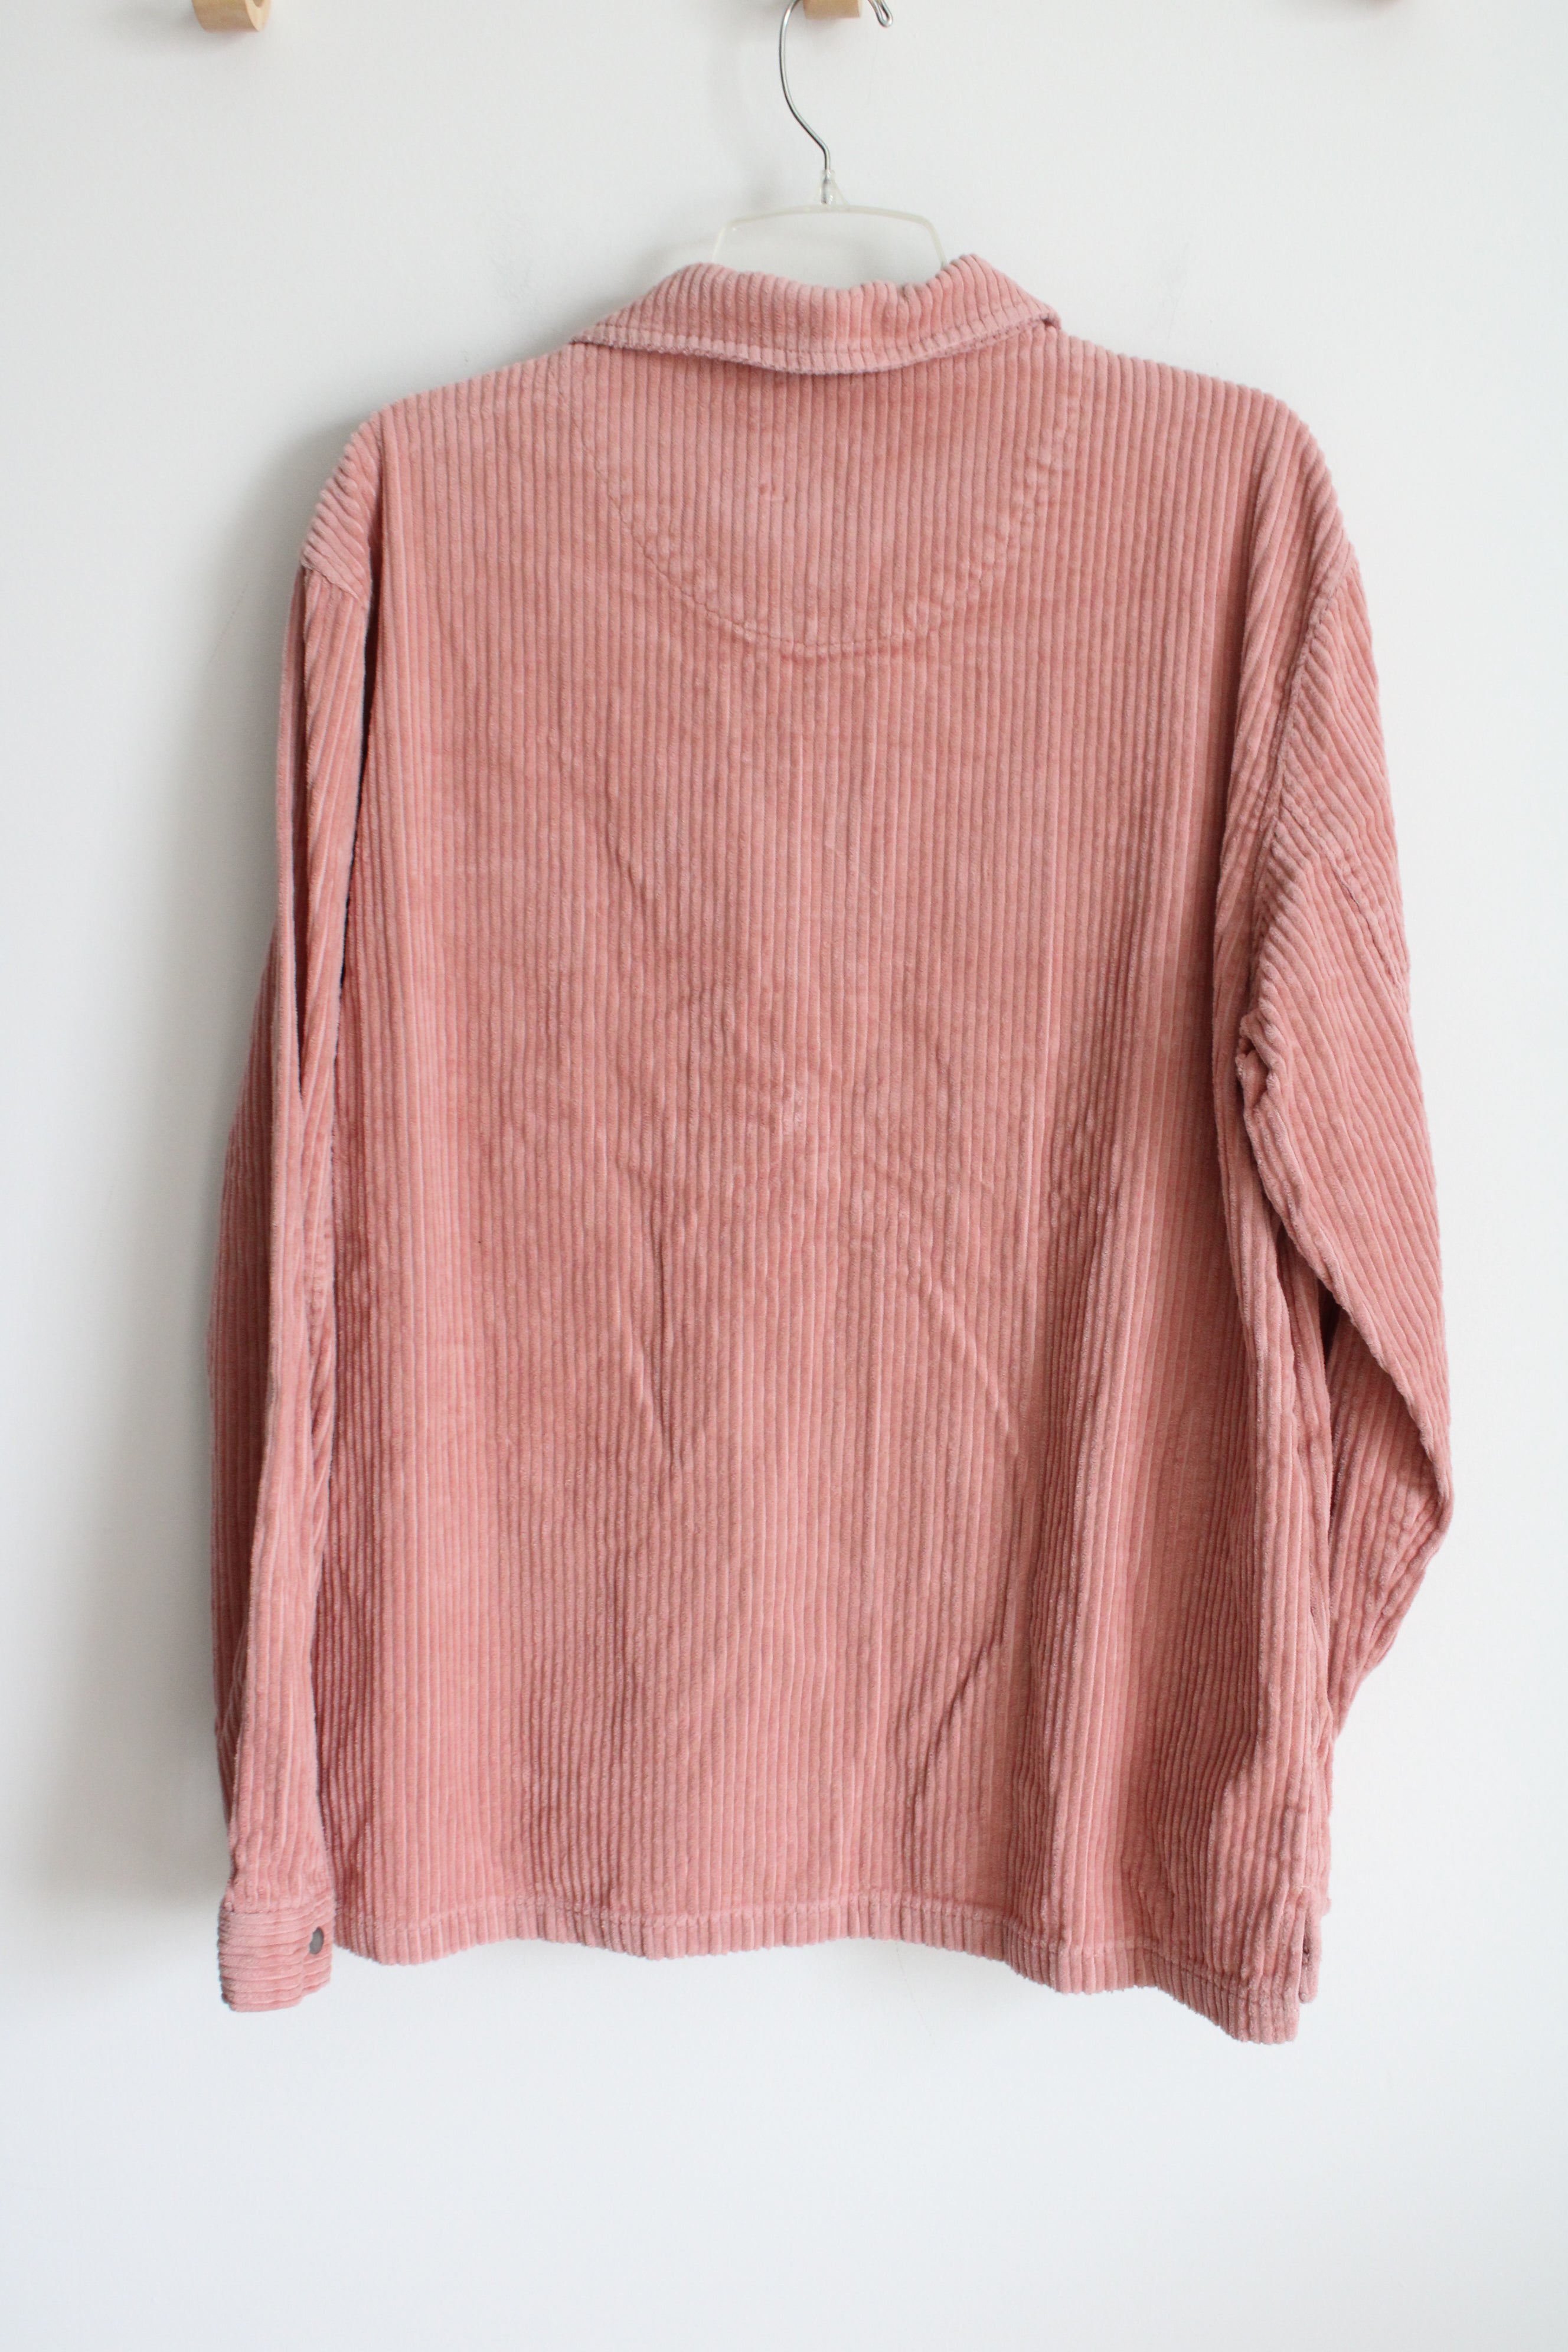 Urban Outfitters Pink Corduroy Ribbed Zip Up Jacket | L